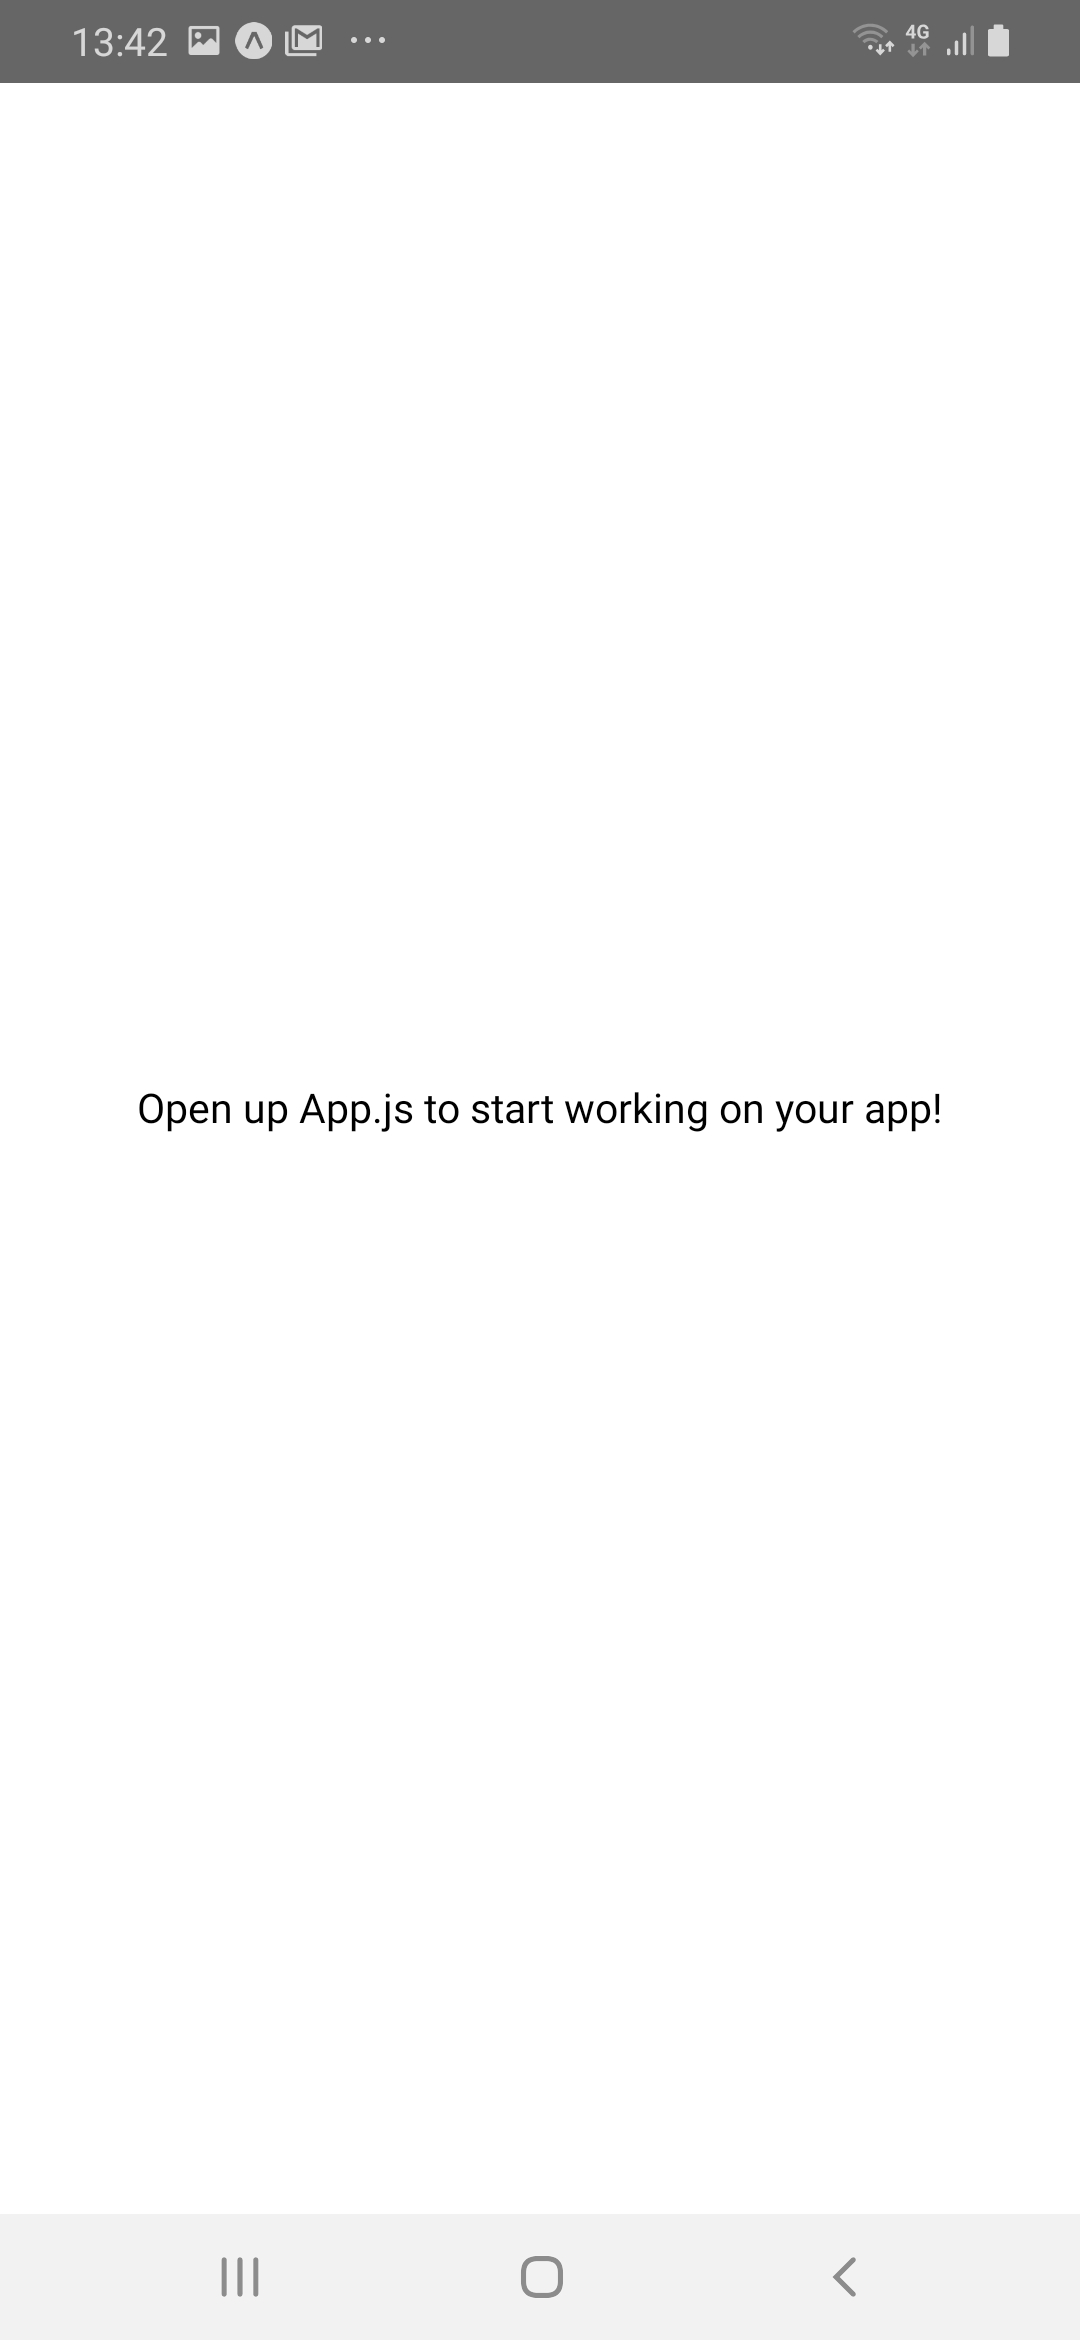 Starting your app on your mobile device